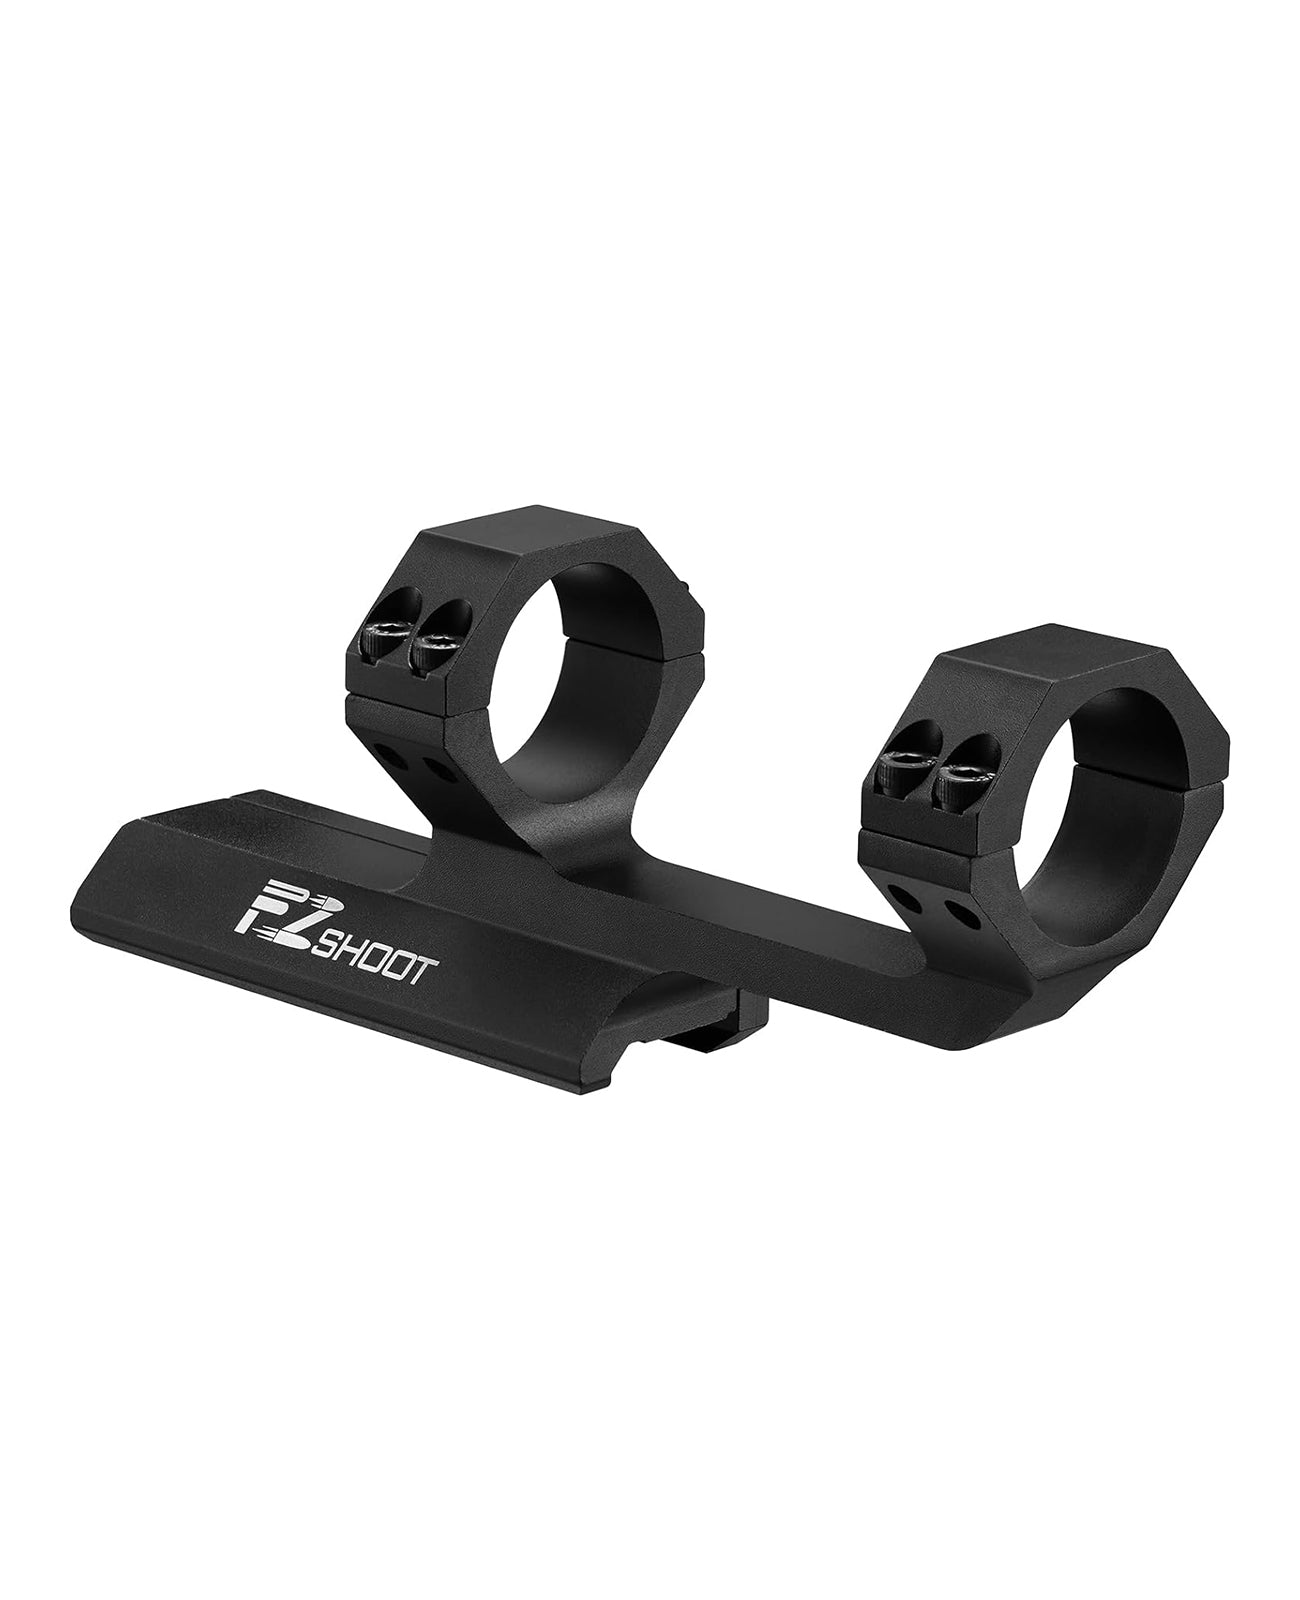 EZshoot Cantilever Offset Scope Mount Dual Ring for Picatinny Rail